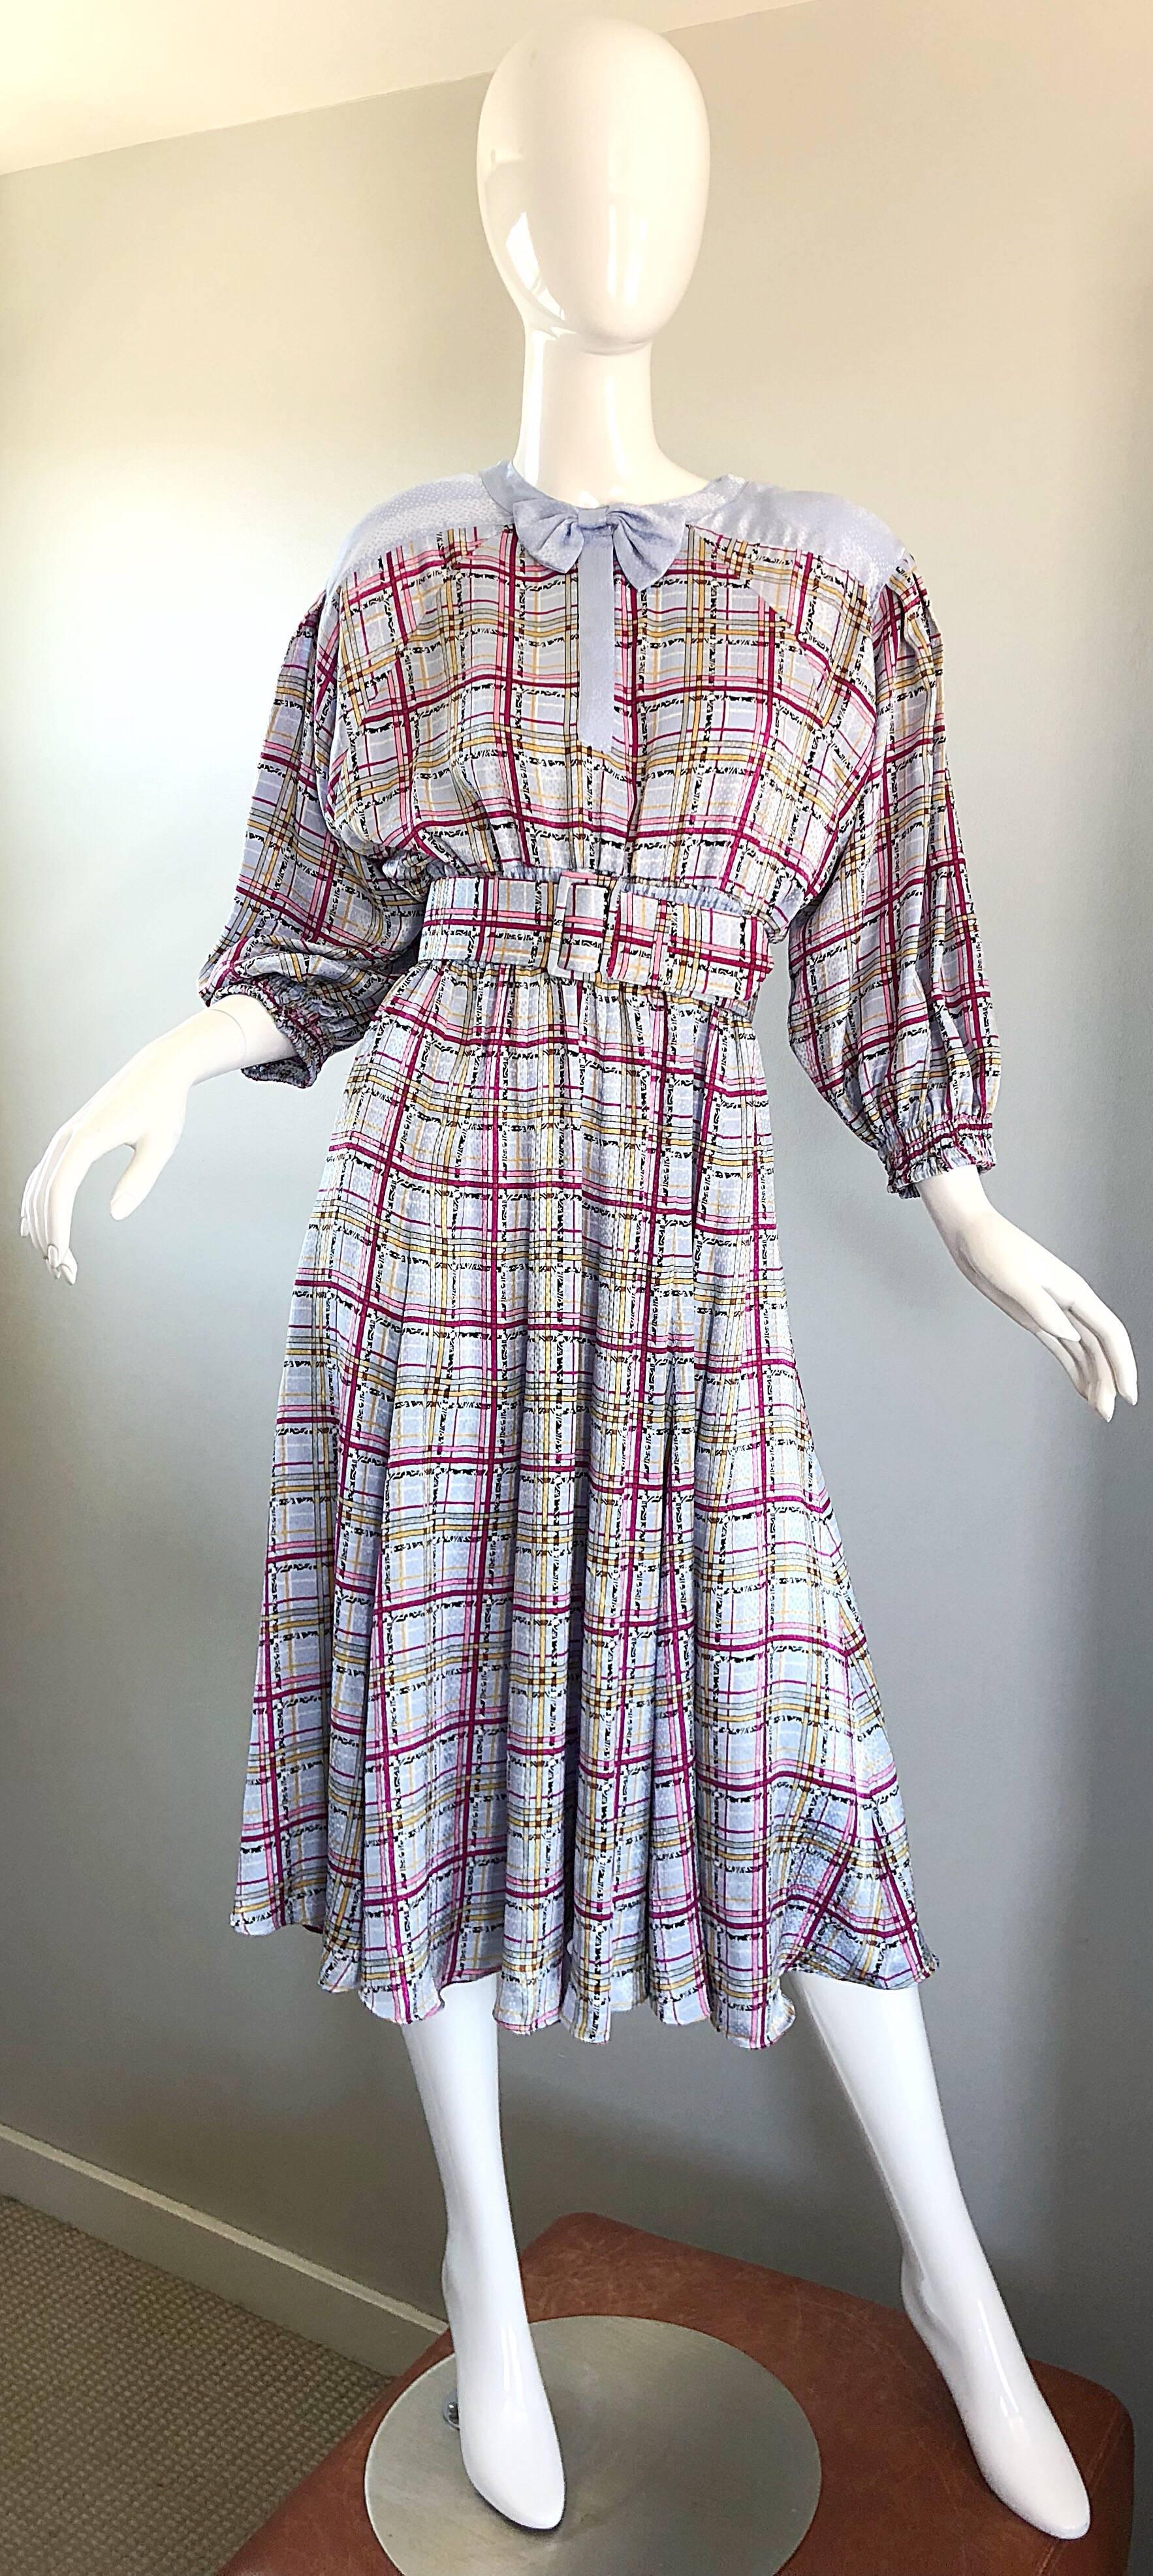 Beautiful 1980s DIANE FREIS belted dress! Classic Freis silhouette is super easy and comfortable to wear, without sacrificing style. Soft pastel shades of purple and pink, with just a bit of yellow. Hidden buttons up the front neck with a chic bow